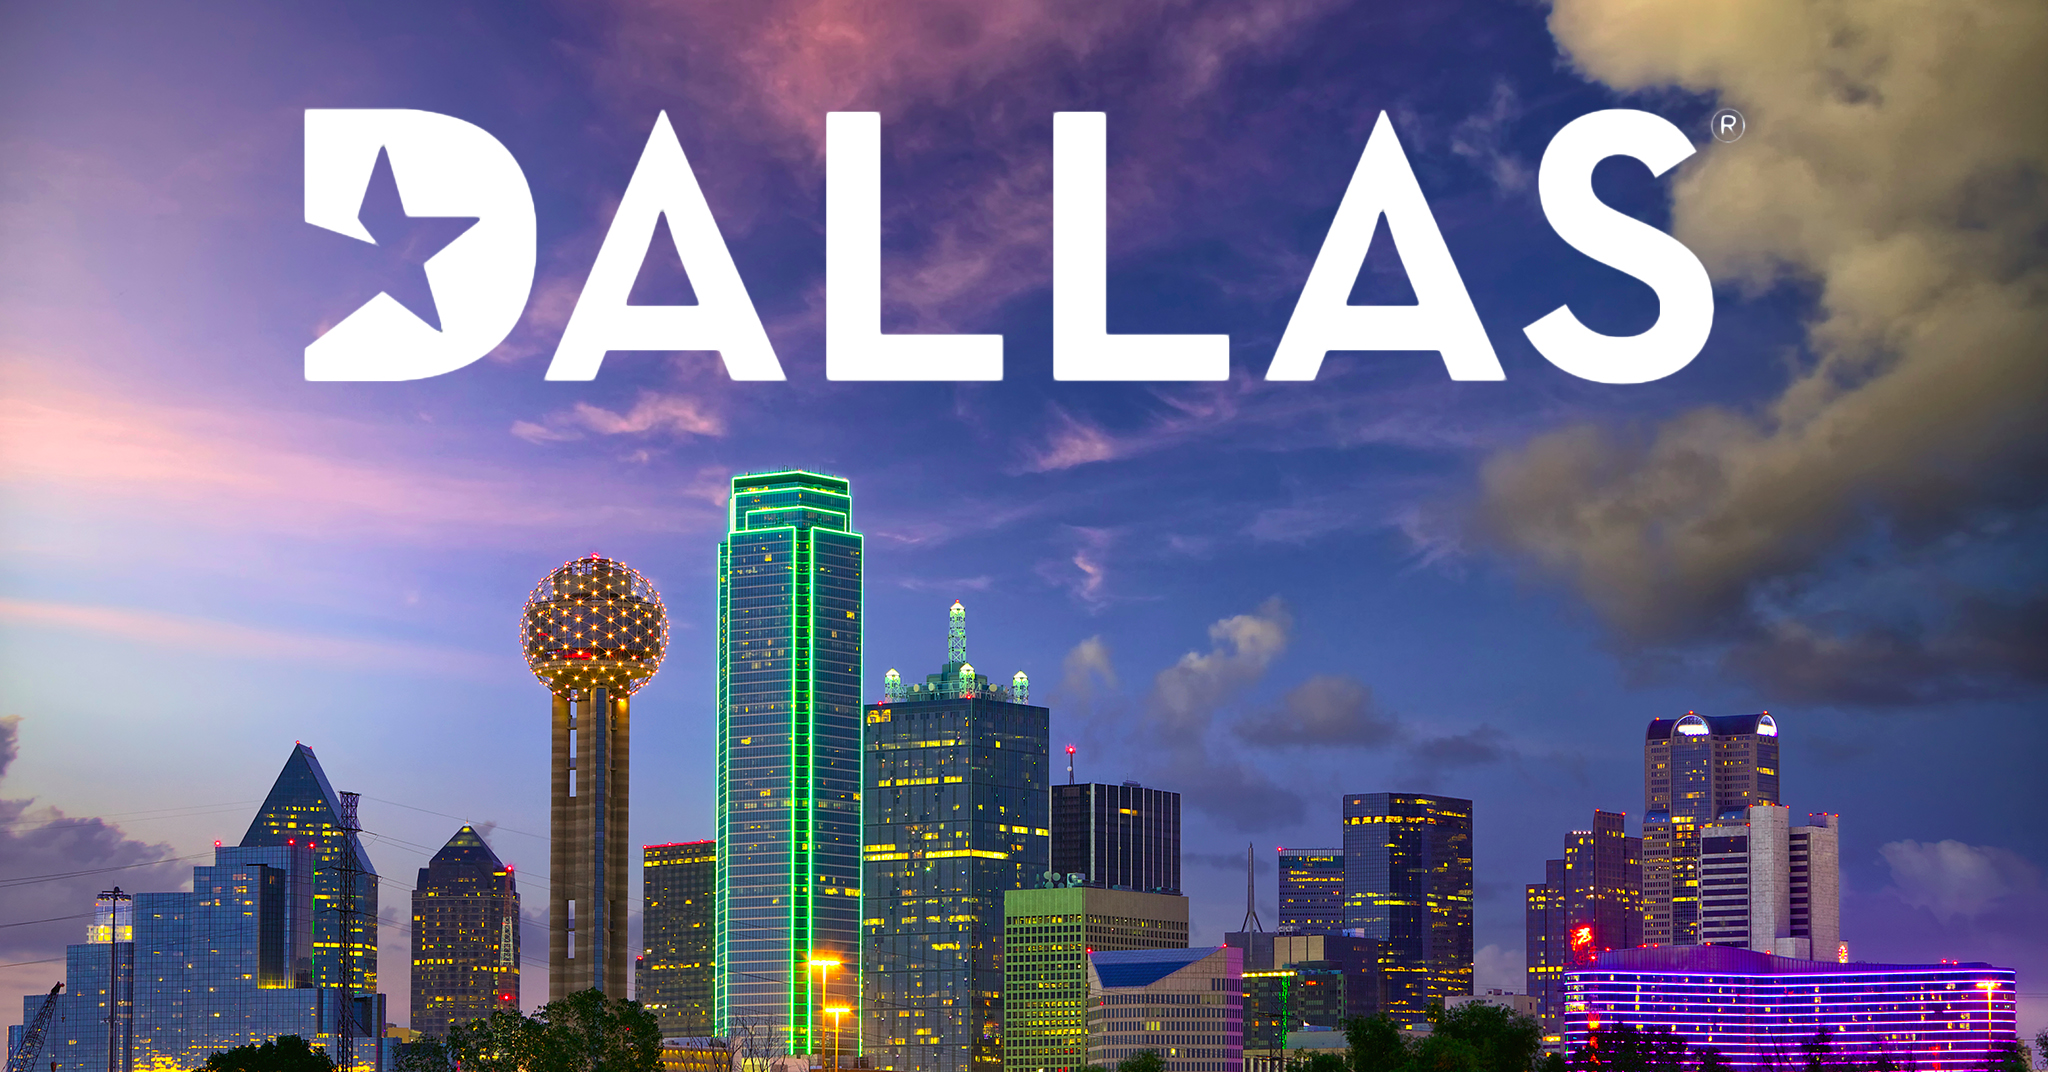 Amazing Dallas Pictures & Backgrounds